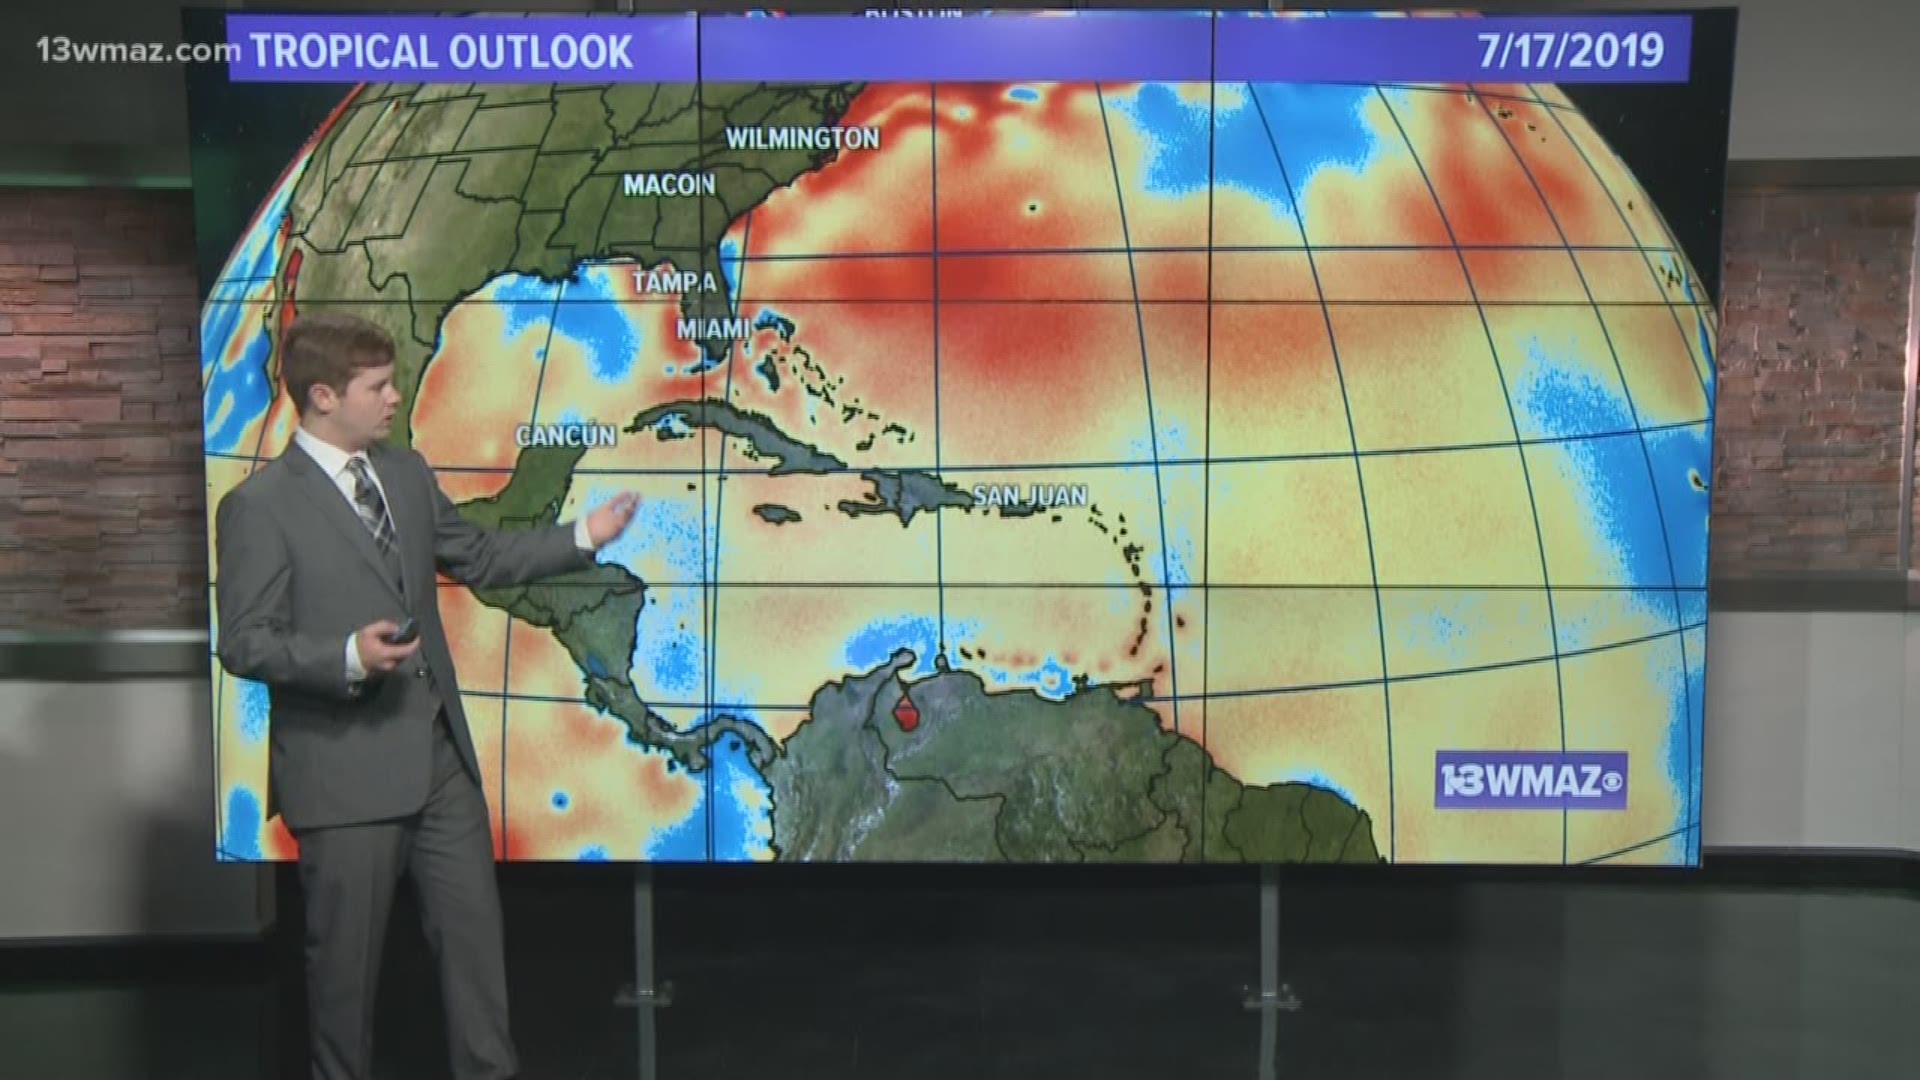 Now that Hurricane Barry is well on the way out, what comes next in the tropics?